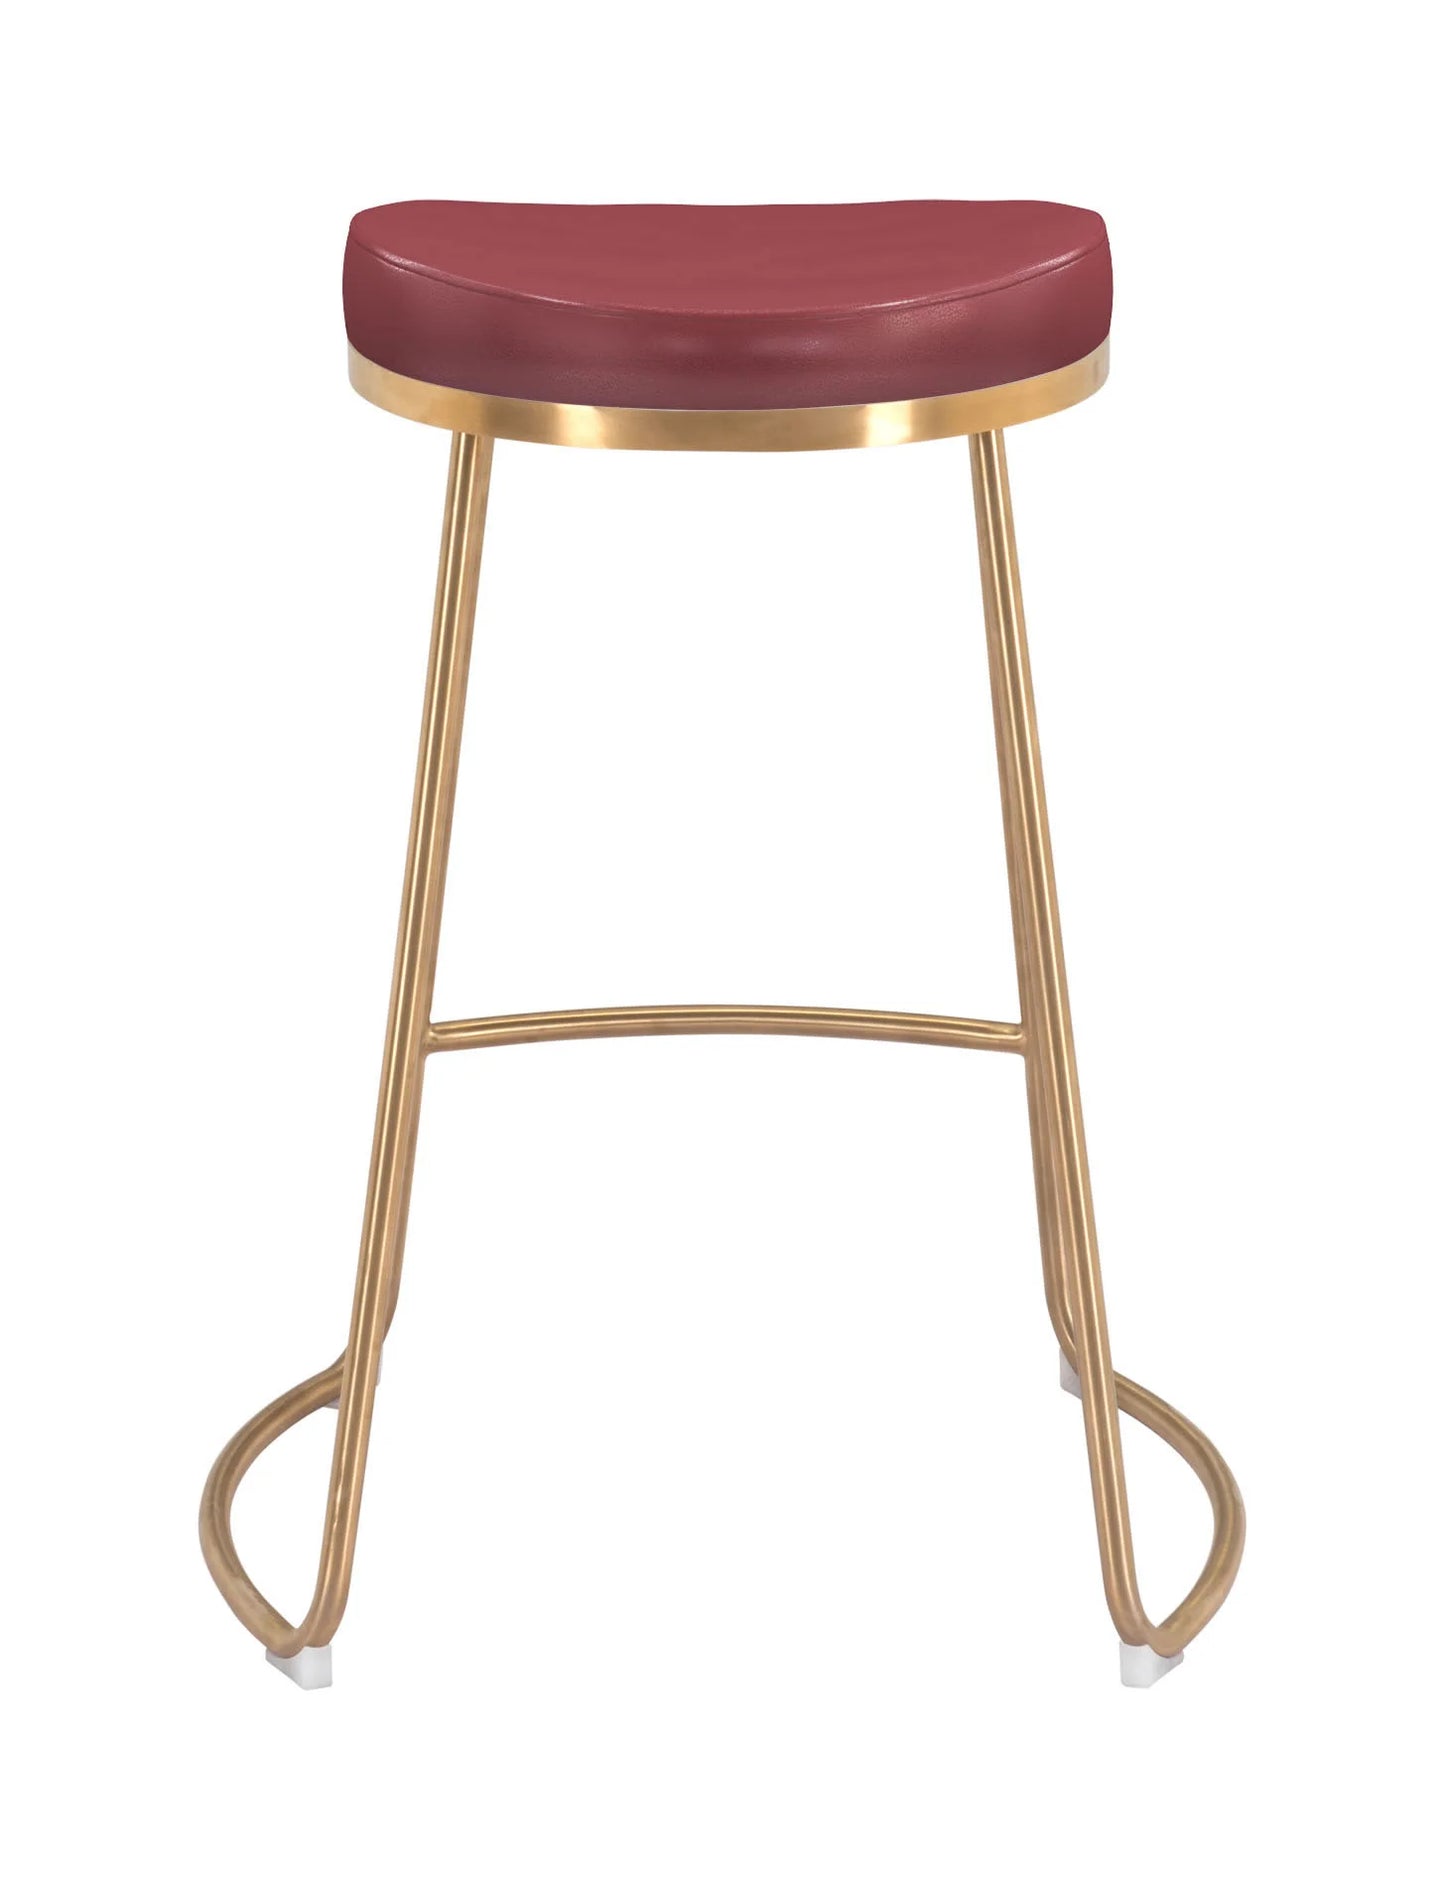 Bree Counter Stool Burgundy & Gold (Set of 2)